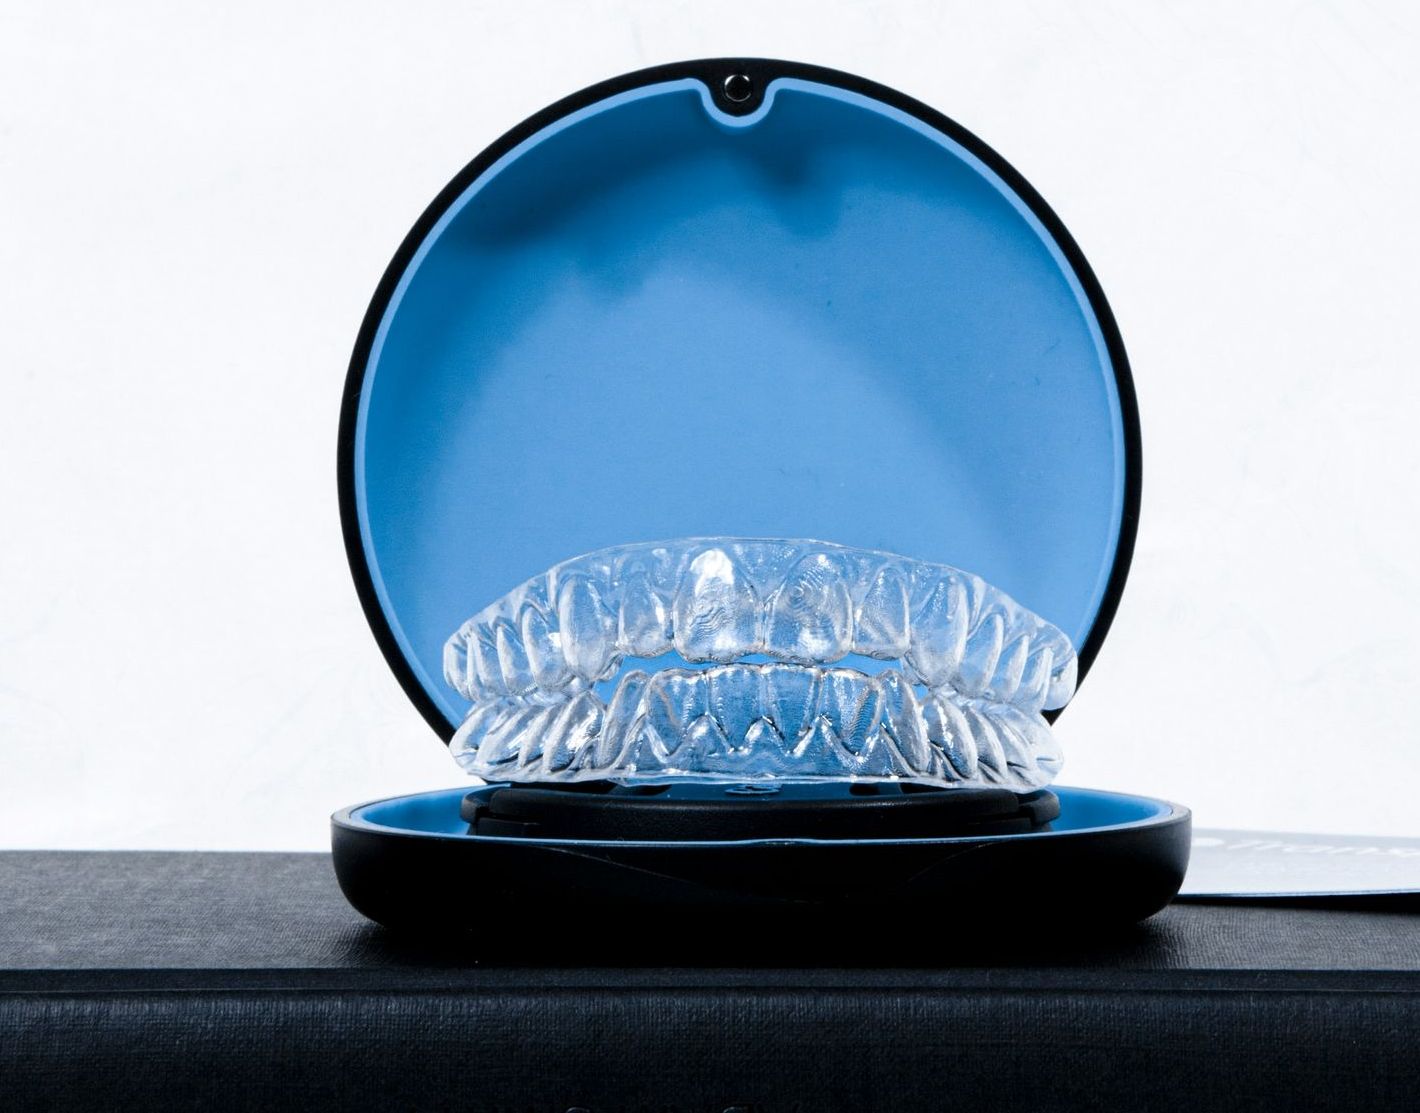 Invisalign clear aligners are sitting in their open case